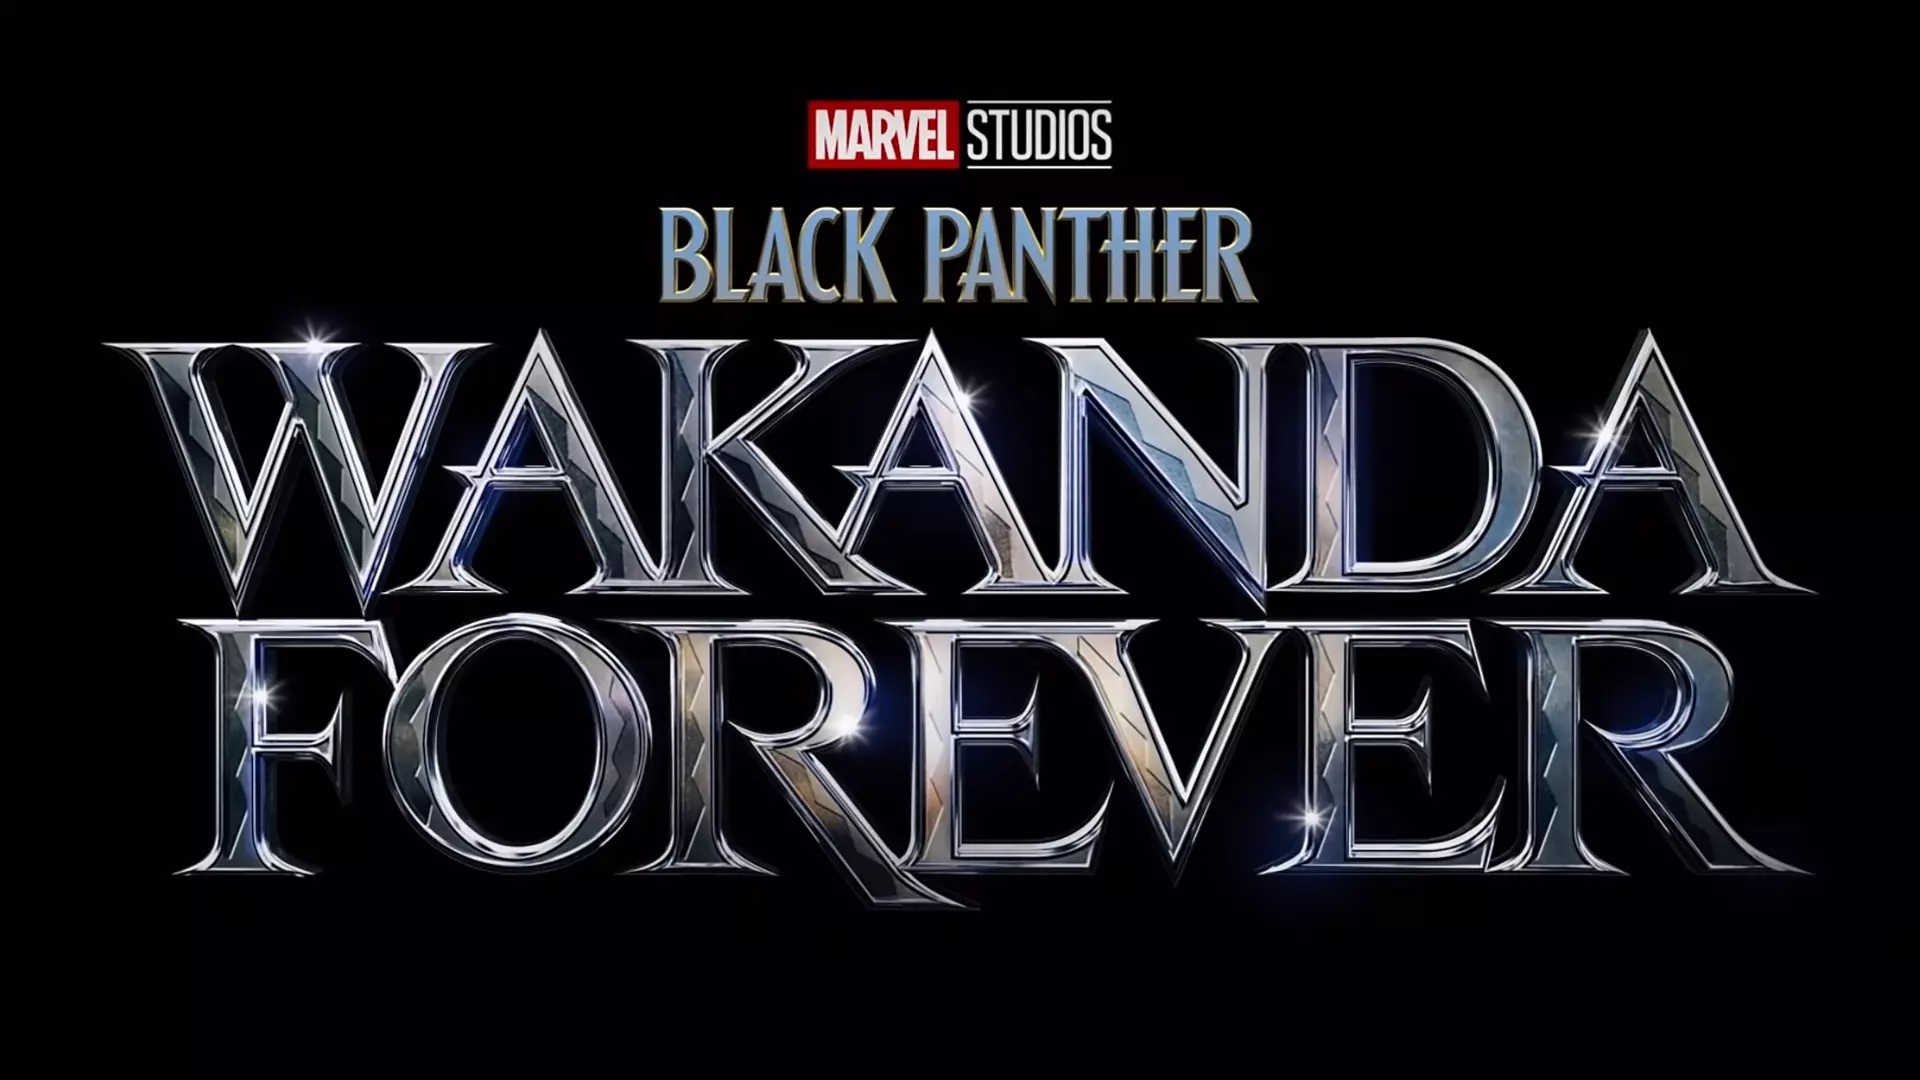 black panther wakanda forever titolo